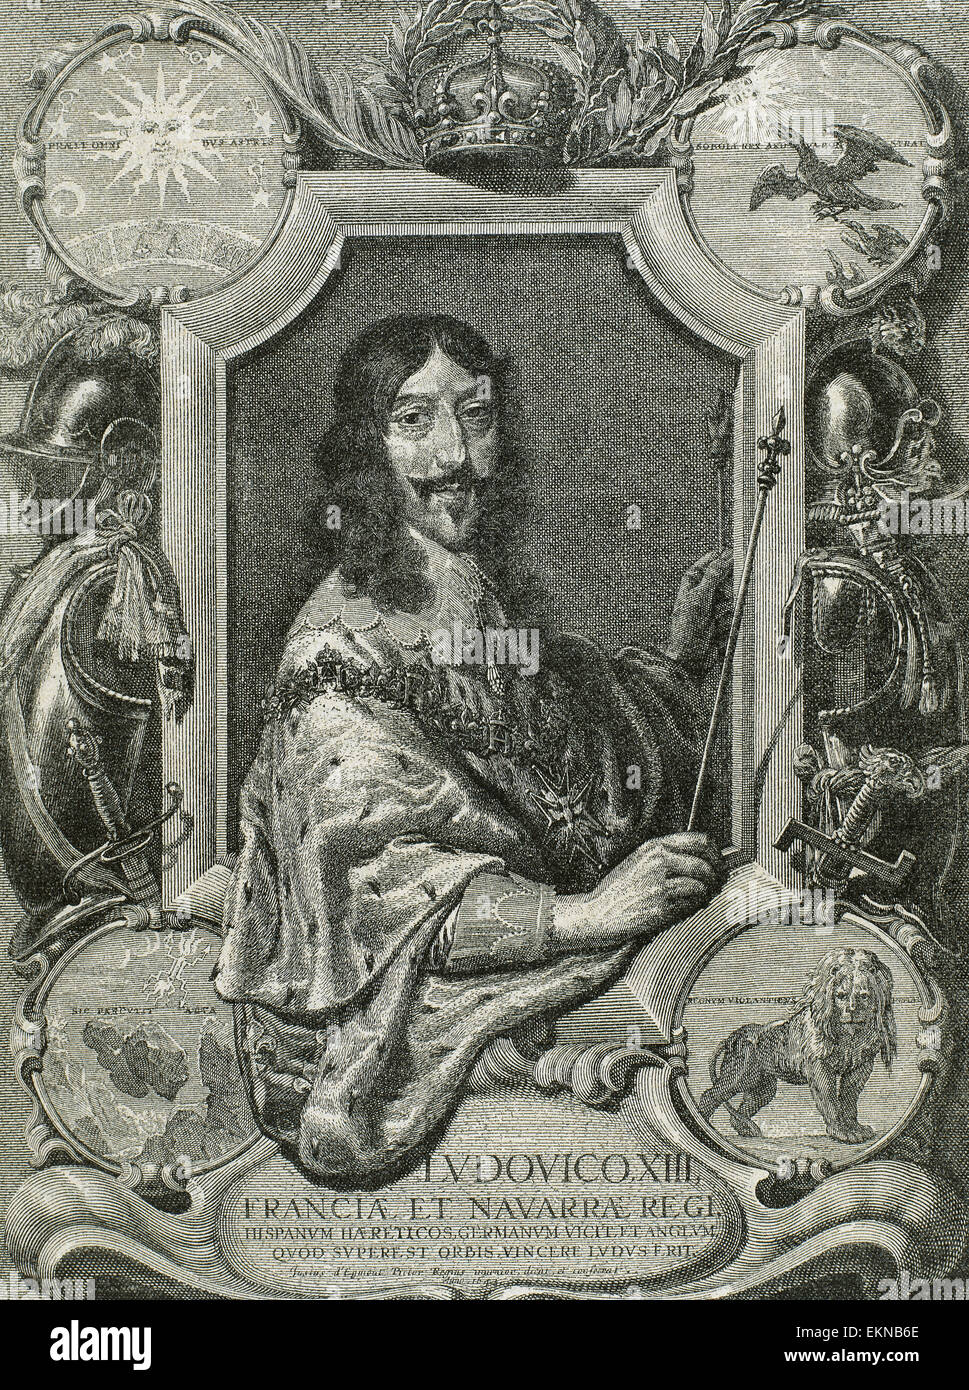 Louis XIII of France (1601-1643). Monarch of the House of Bourbon. King of France and Navarre (Louis II) from 1610-1620.  Portrait. Engraving. Stock Photo